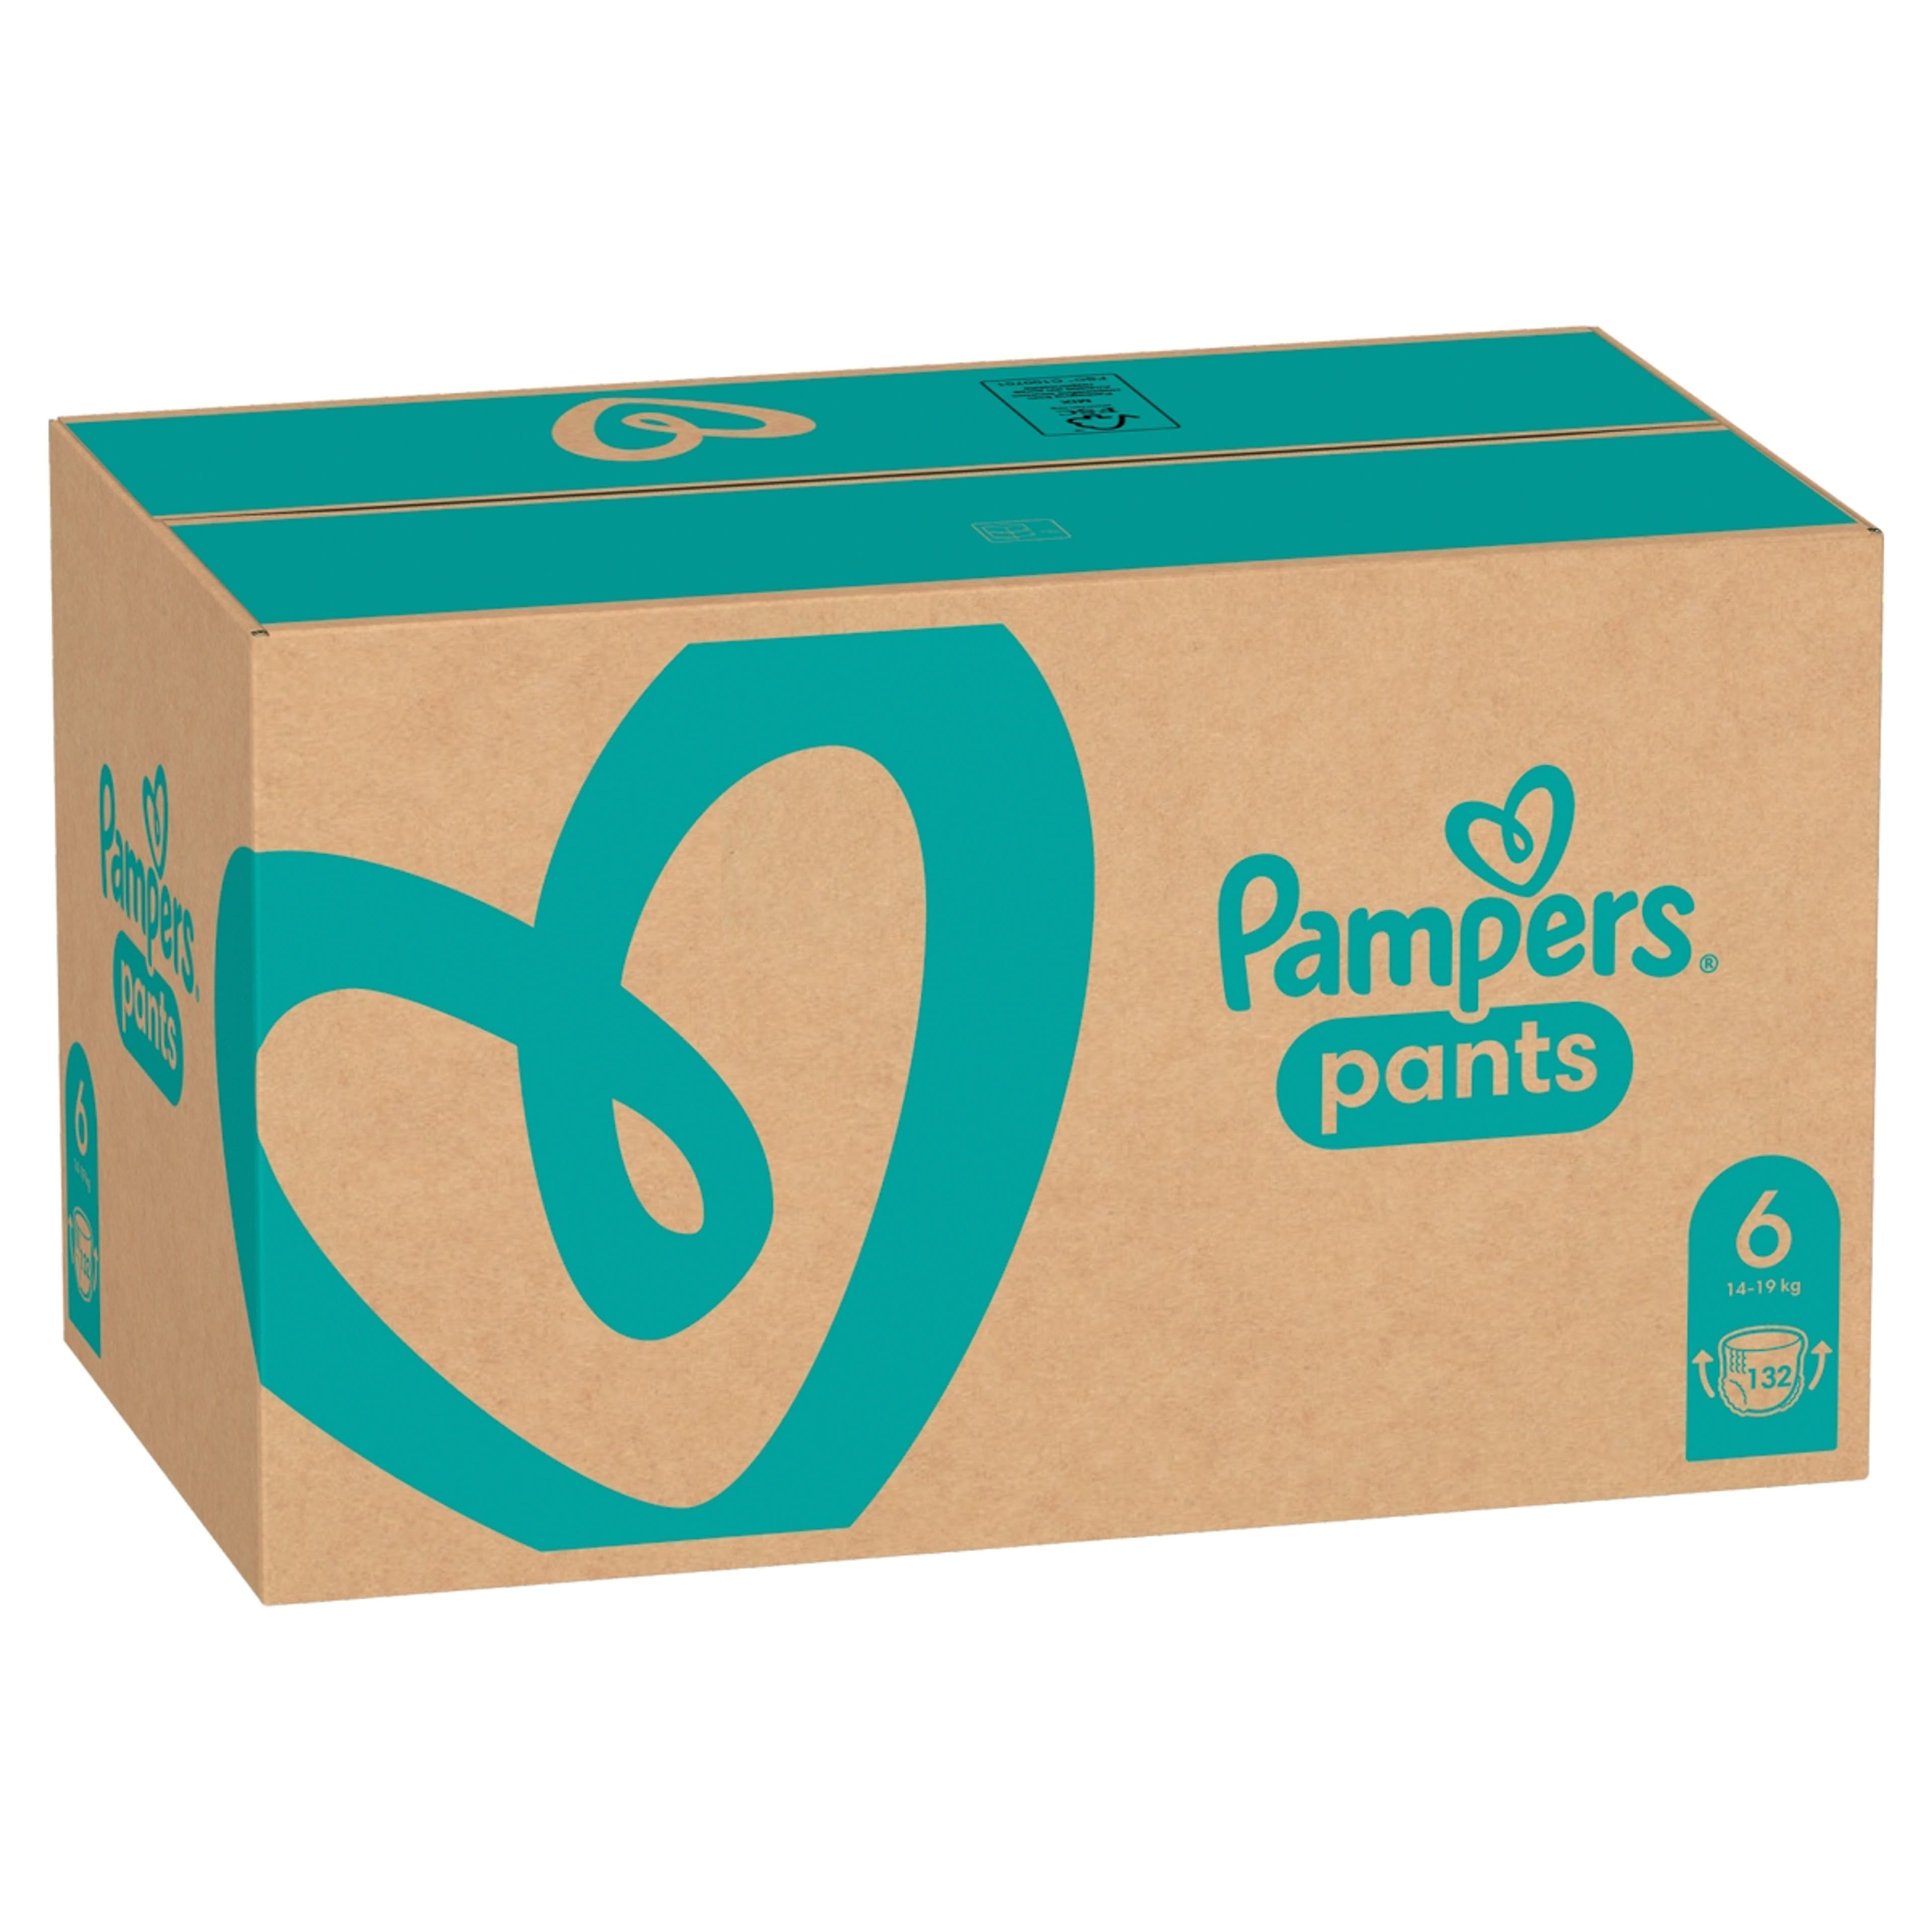 Pampers Pants bugyipelenka monthly pack 6-os 15+ kg - 132 db-2